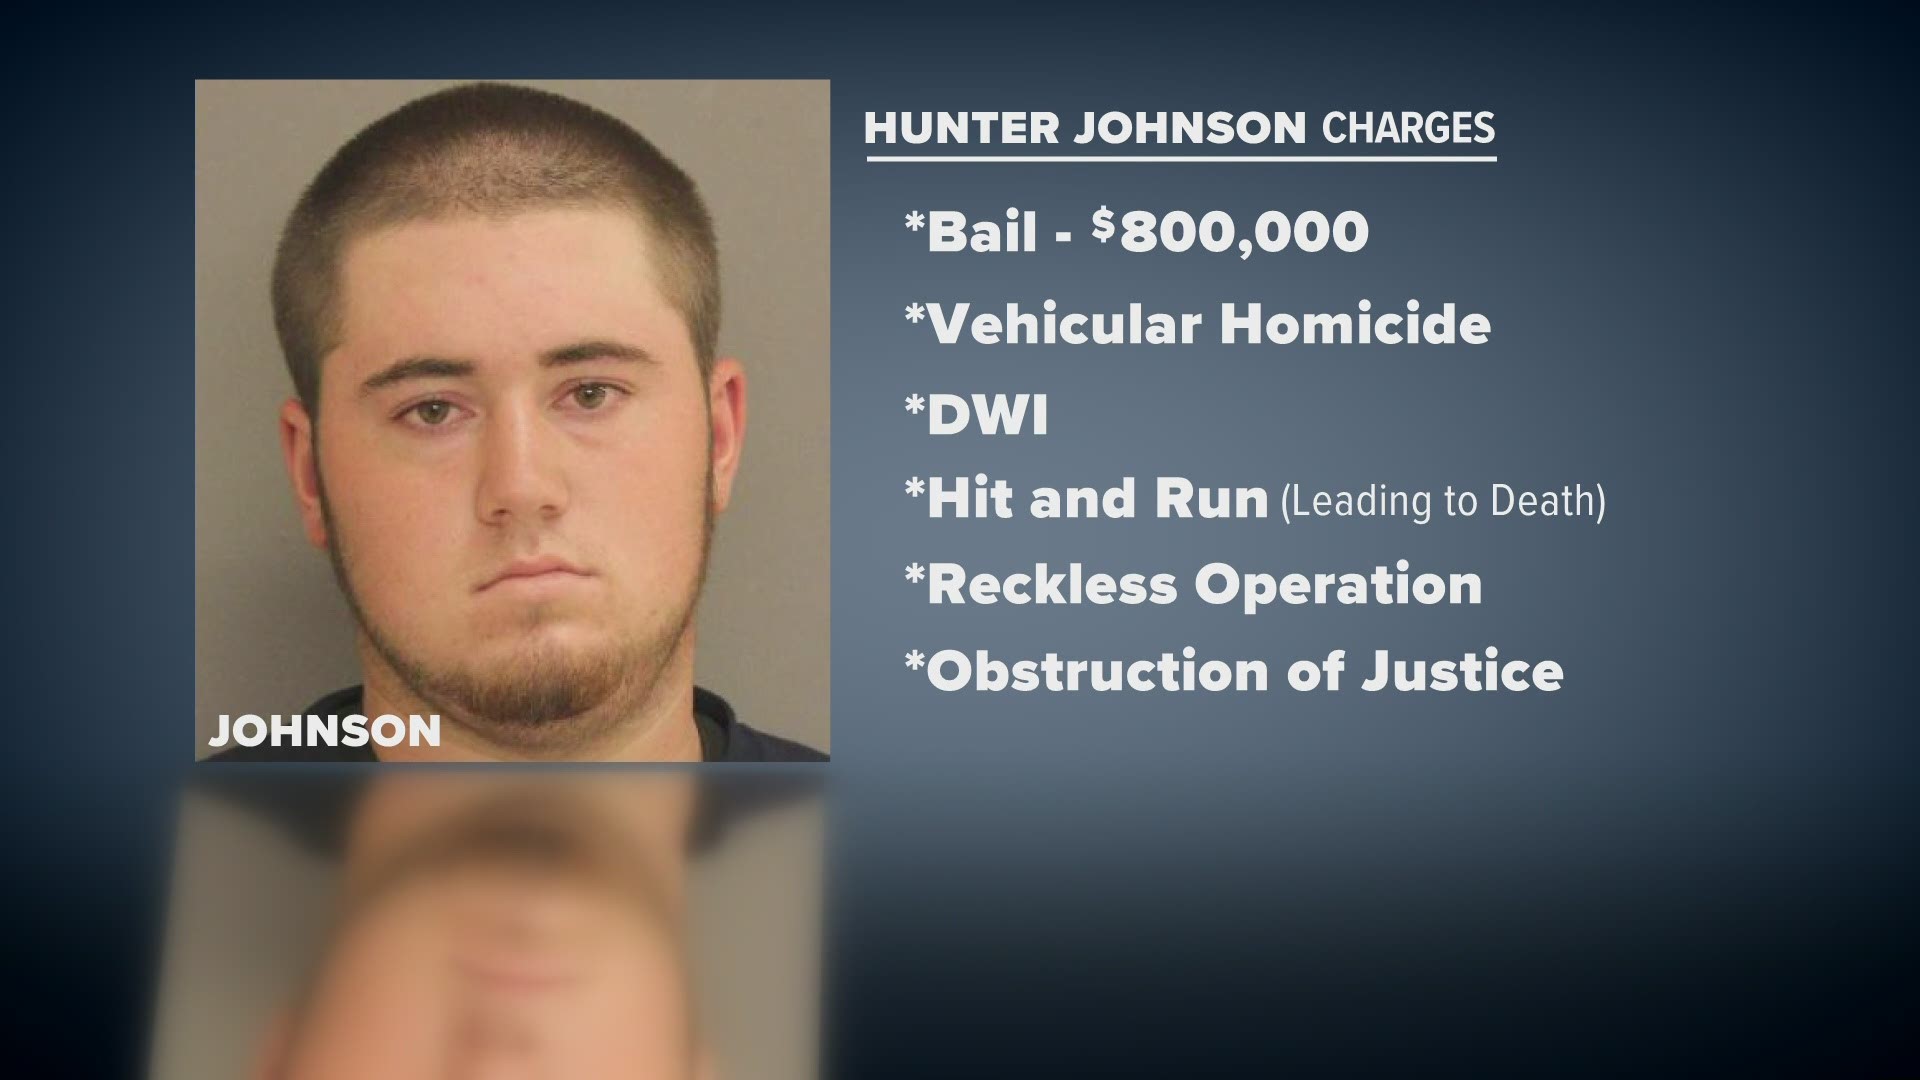 Hunter Johnson was allowed to resume driving, despite being booked March 12 with vehicular homicide, DWI, hit-and-run, reckless operation and obstruction of justice.